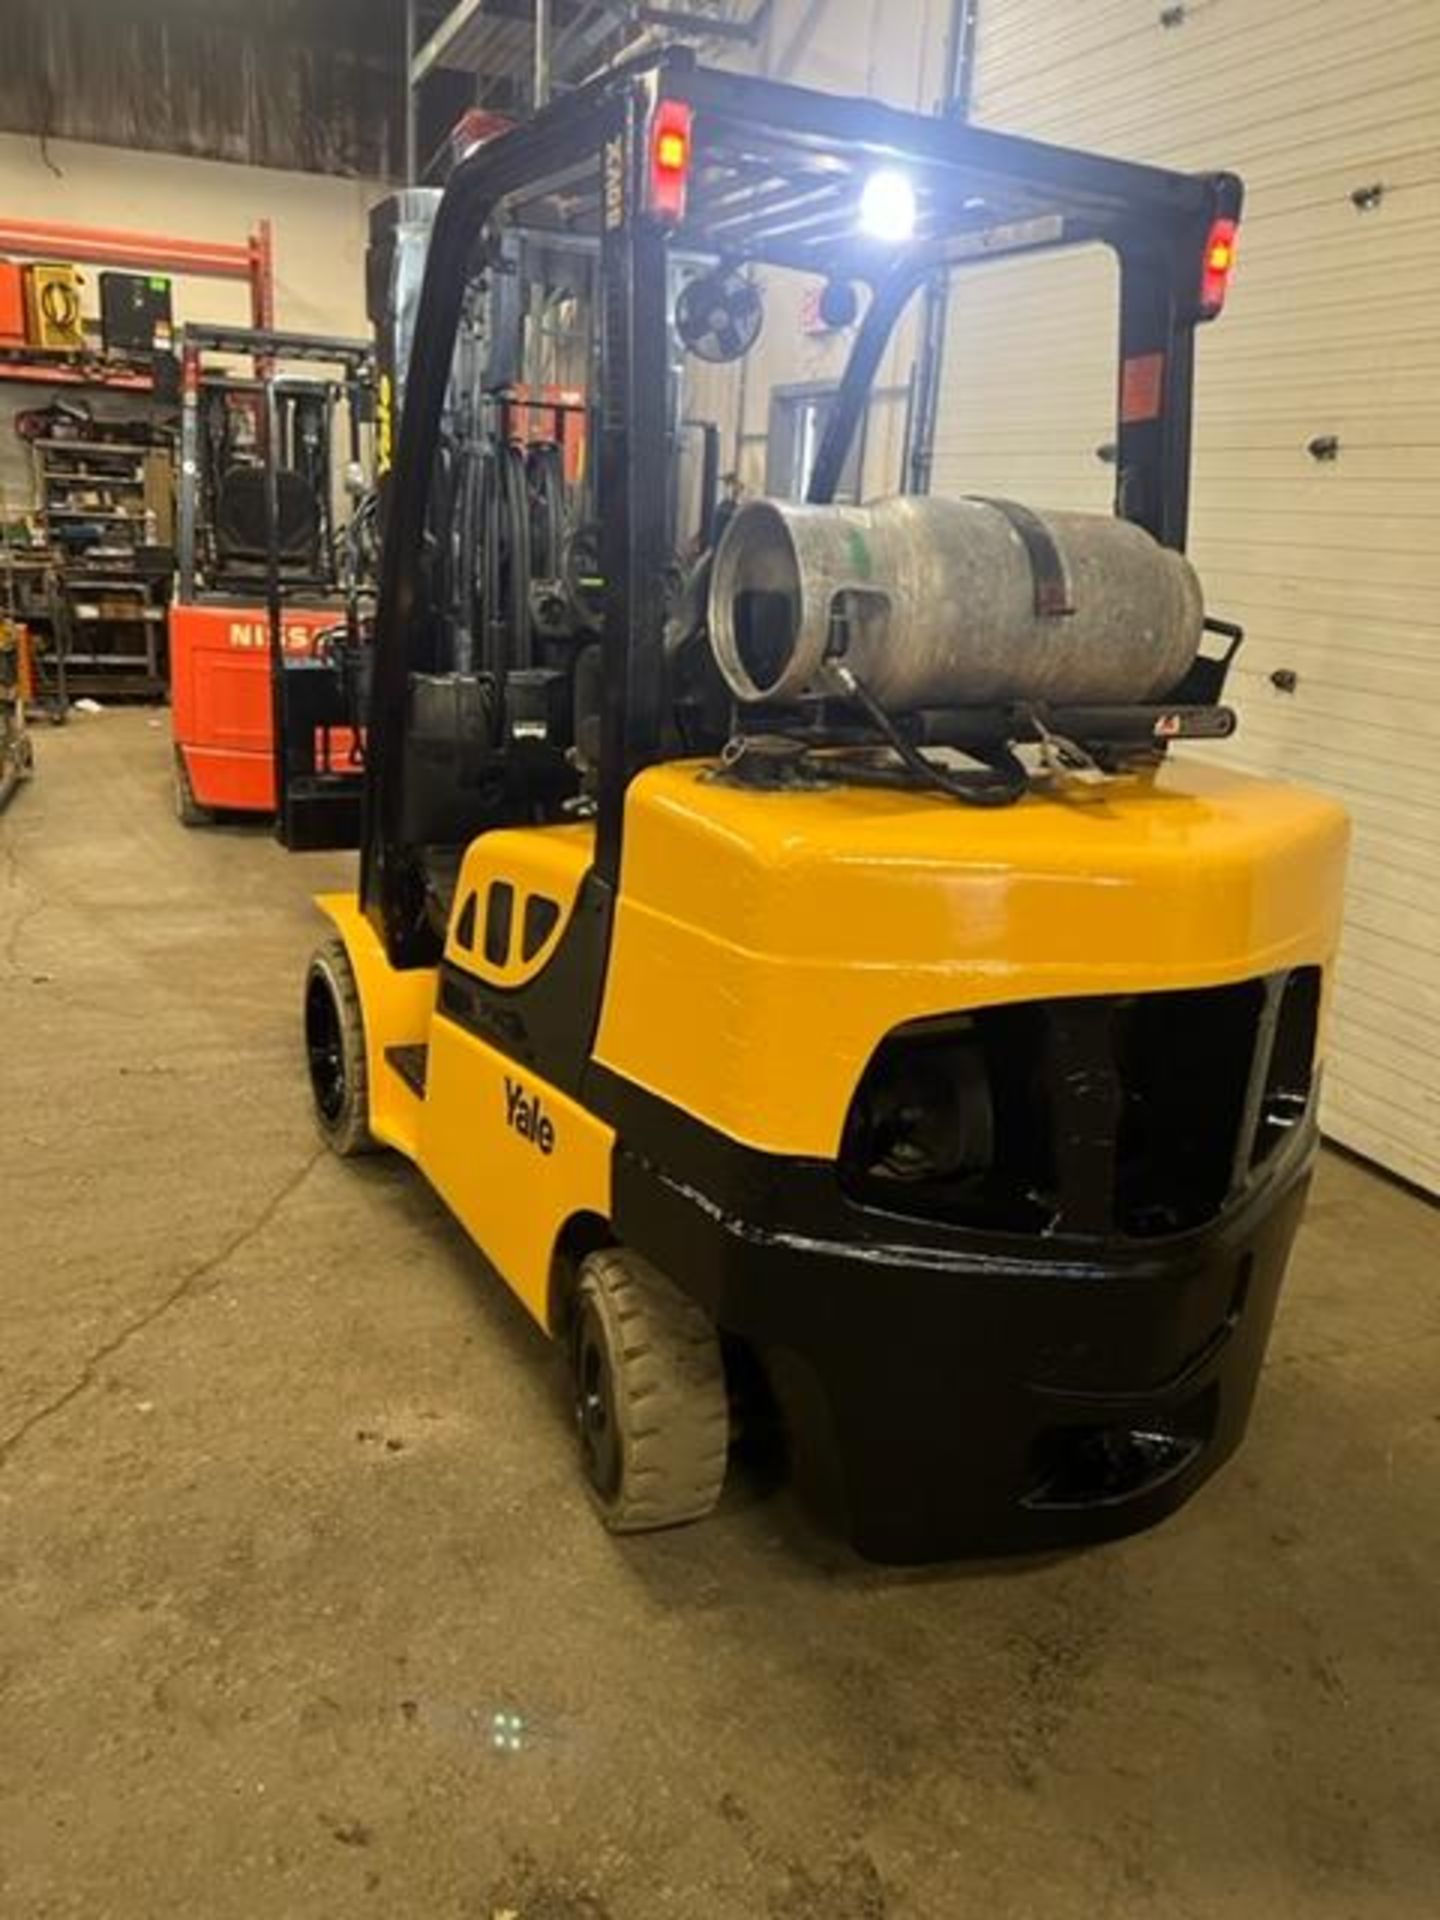 FREE CUSTOMS - NICE 2018 Yale model 80 - 8,000lbs Capacity Forklift LPG (propane) with 54" forks - Image 4 of 4